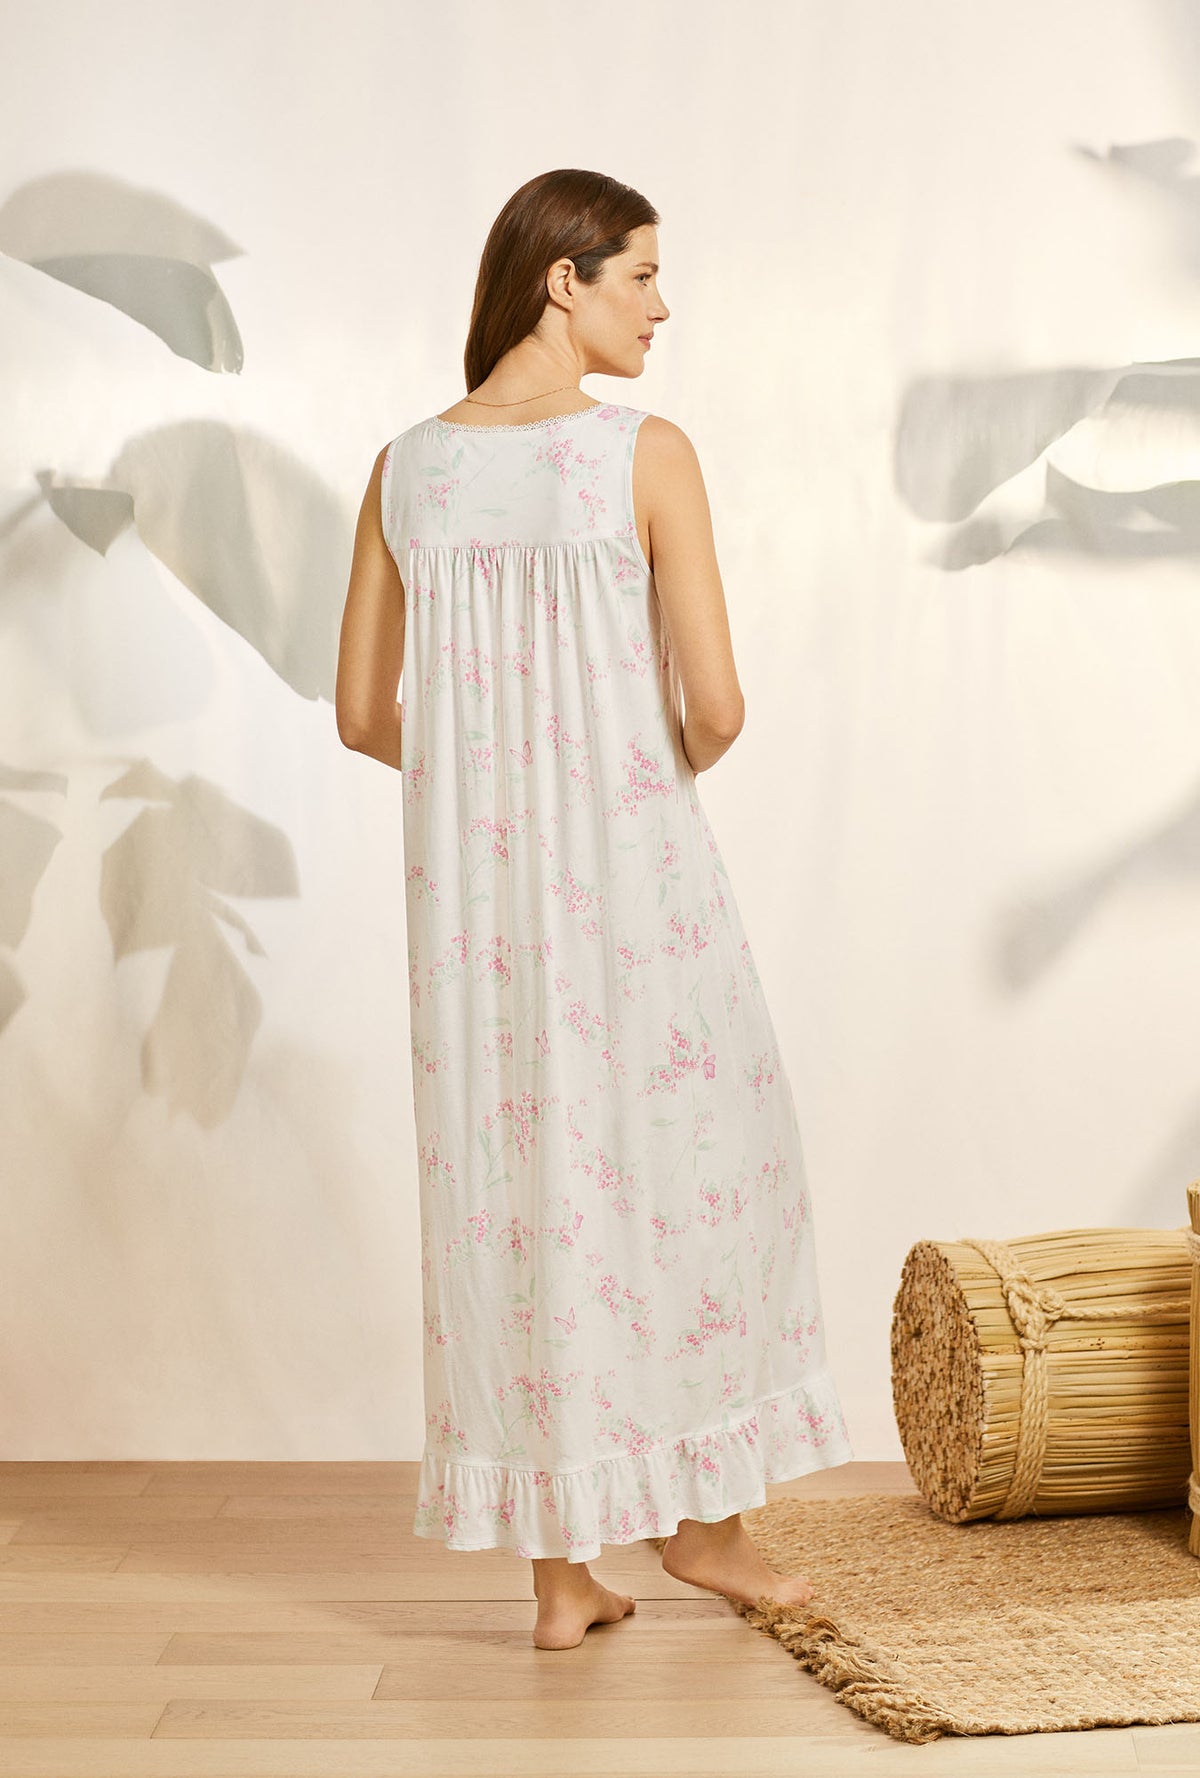 A lady wearing white sleeveless knit eileen nightgown with butterfly floral print.